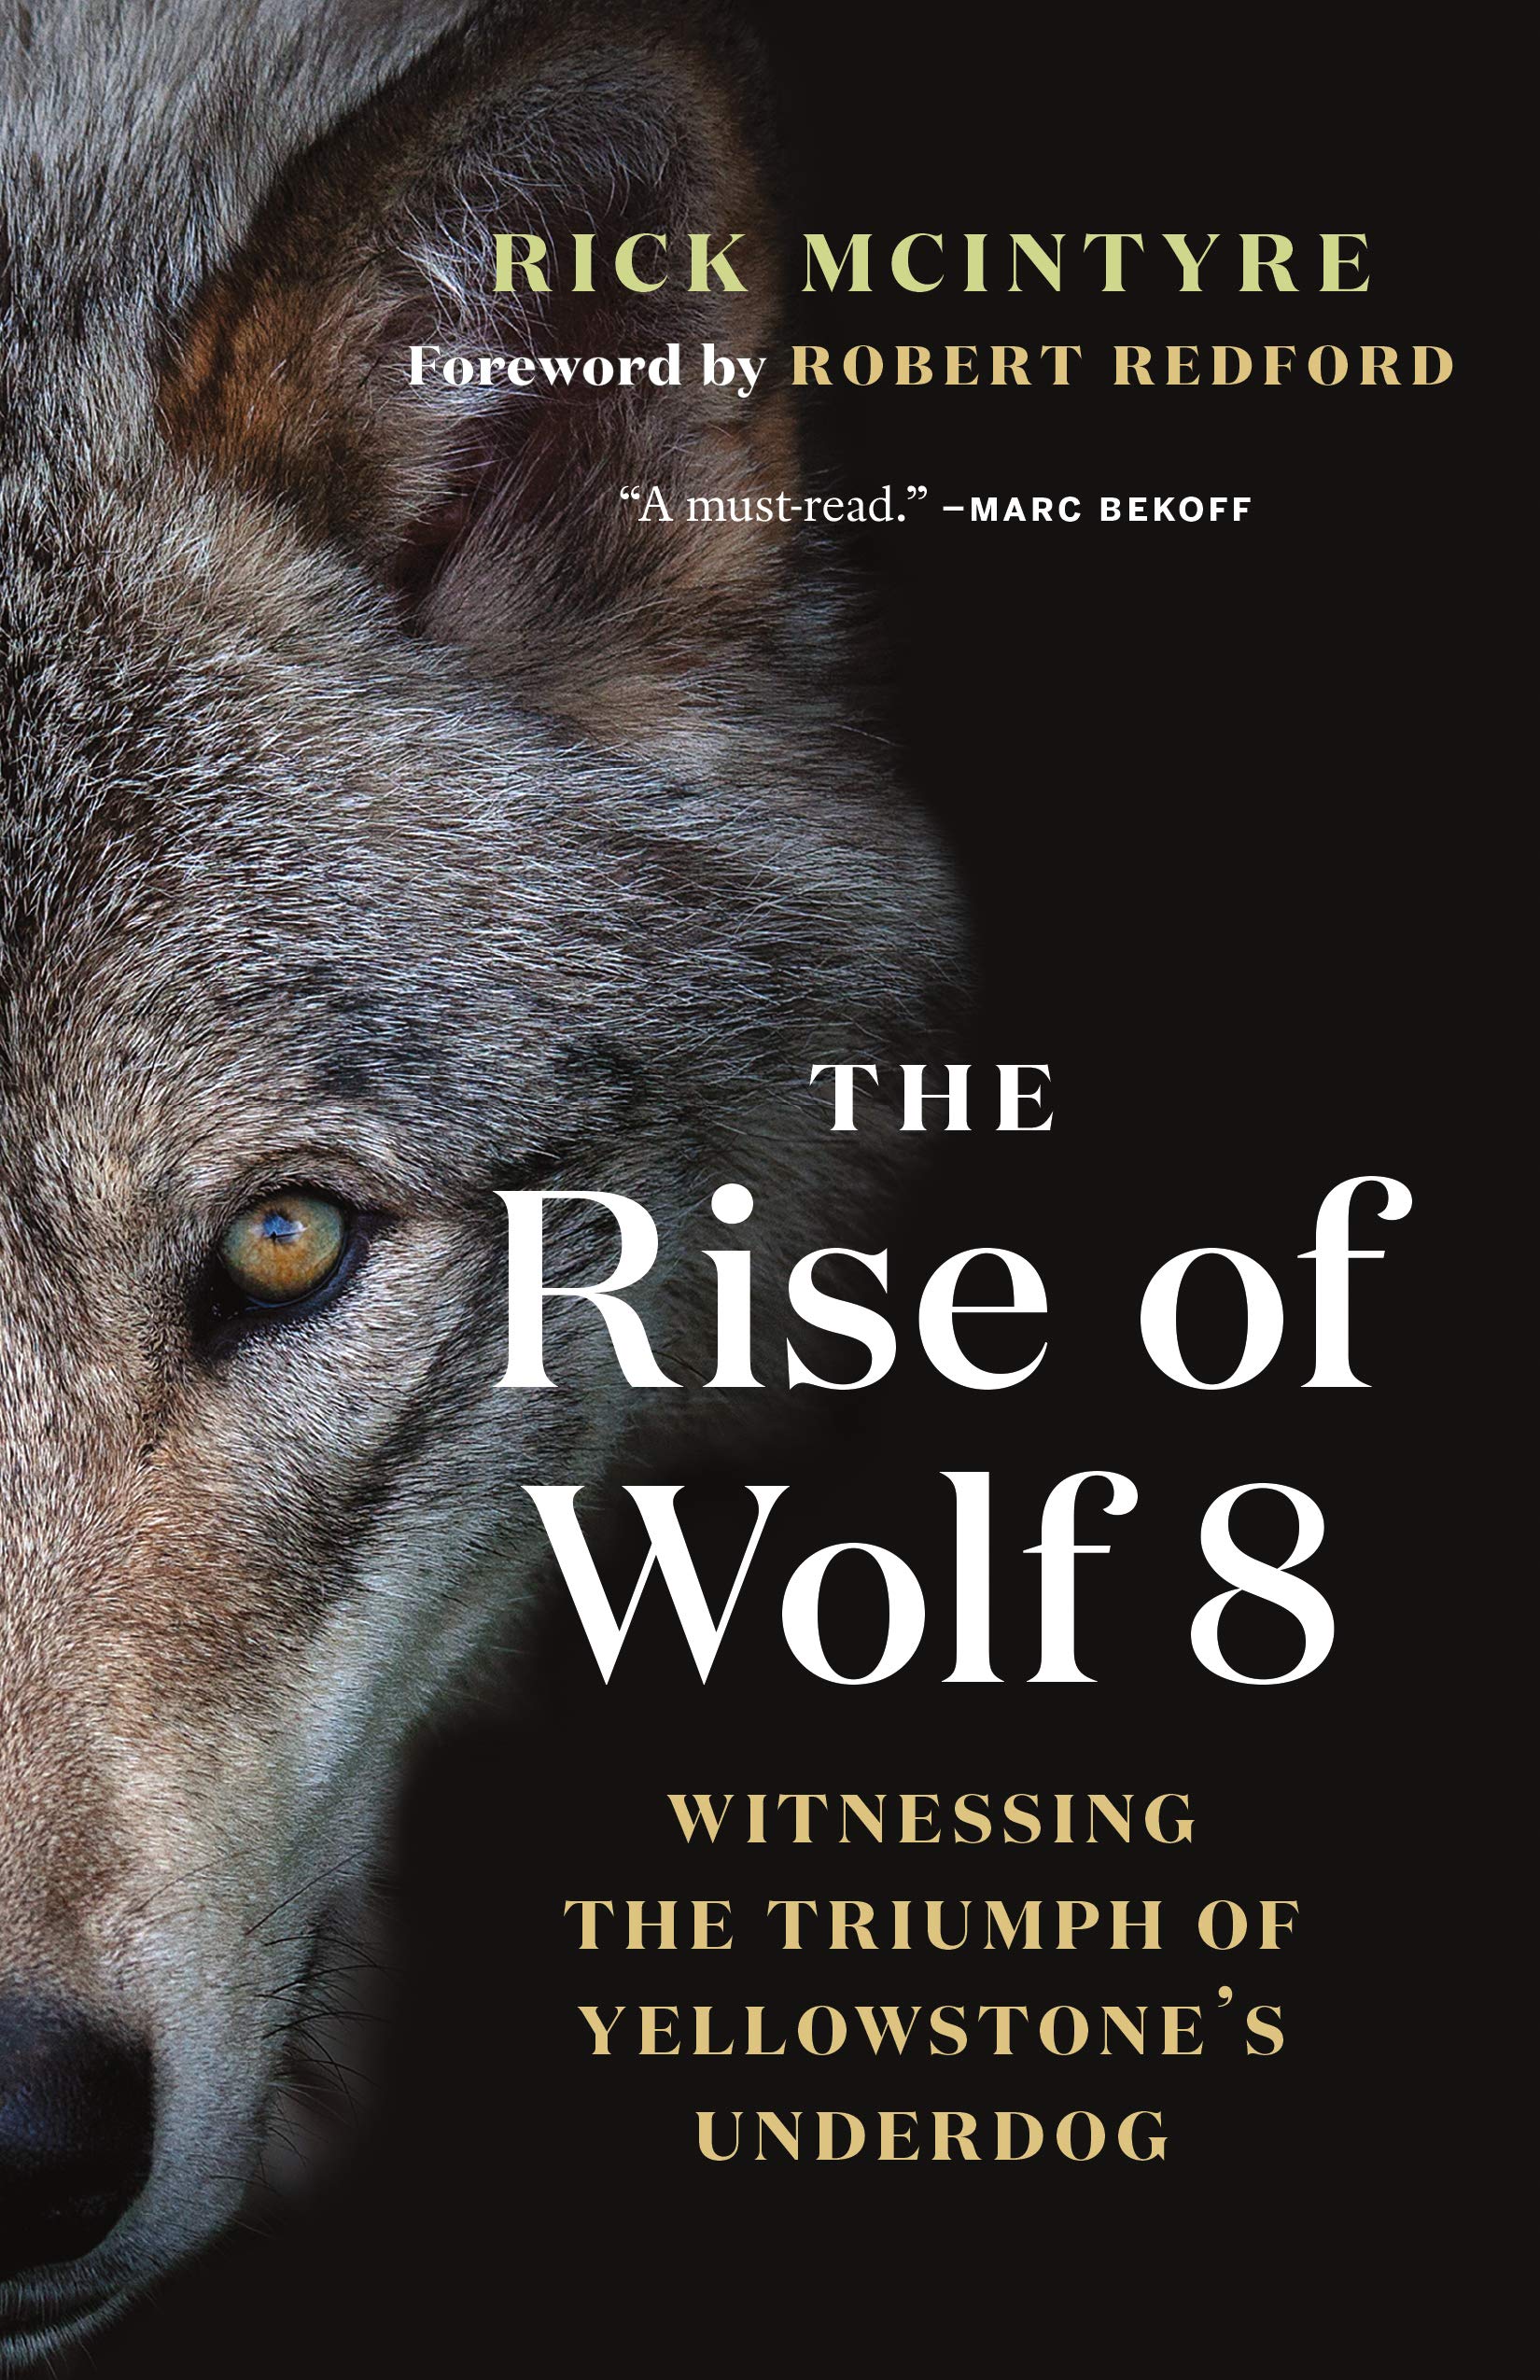 cover of Rise of Wolf 8 by Rick McIntyre